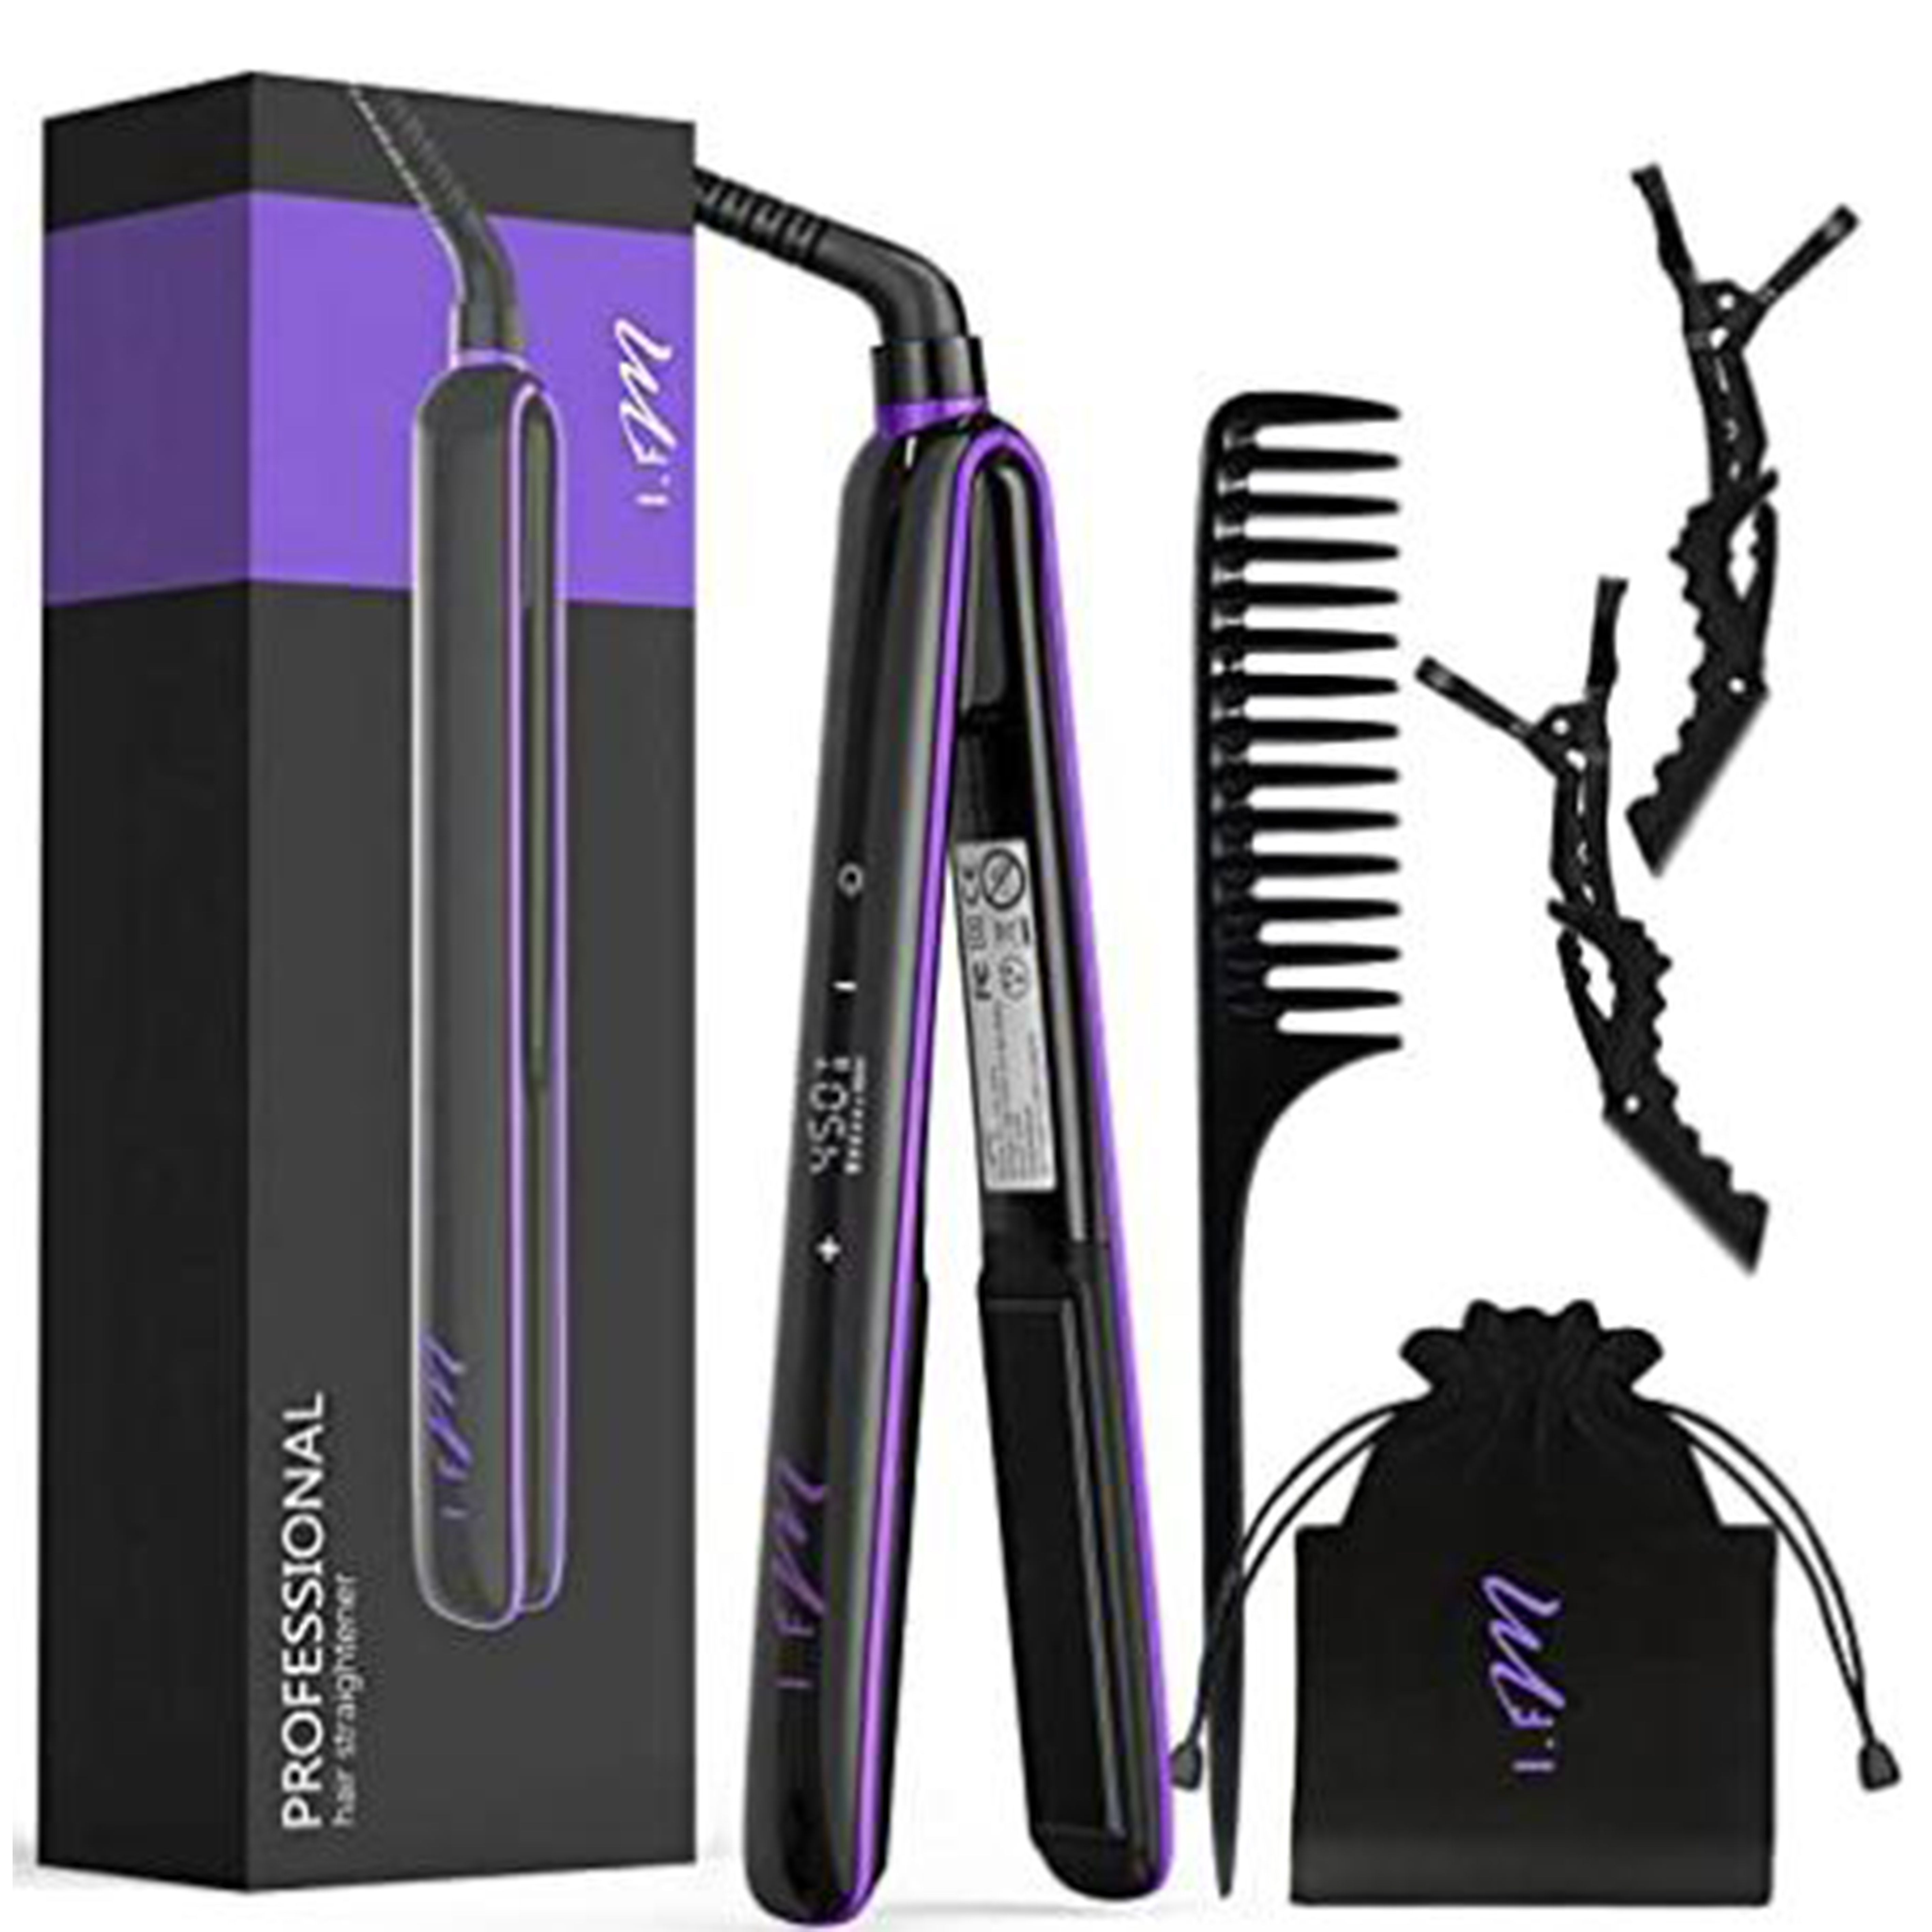 Purple black Hair Straighteners I.FM 2 in 1 Ceramics Styling Tool Professional Curler Negative oxygen ions Portable adjustable High Quality with Stock